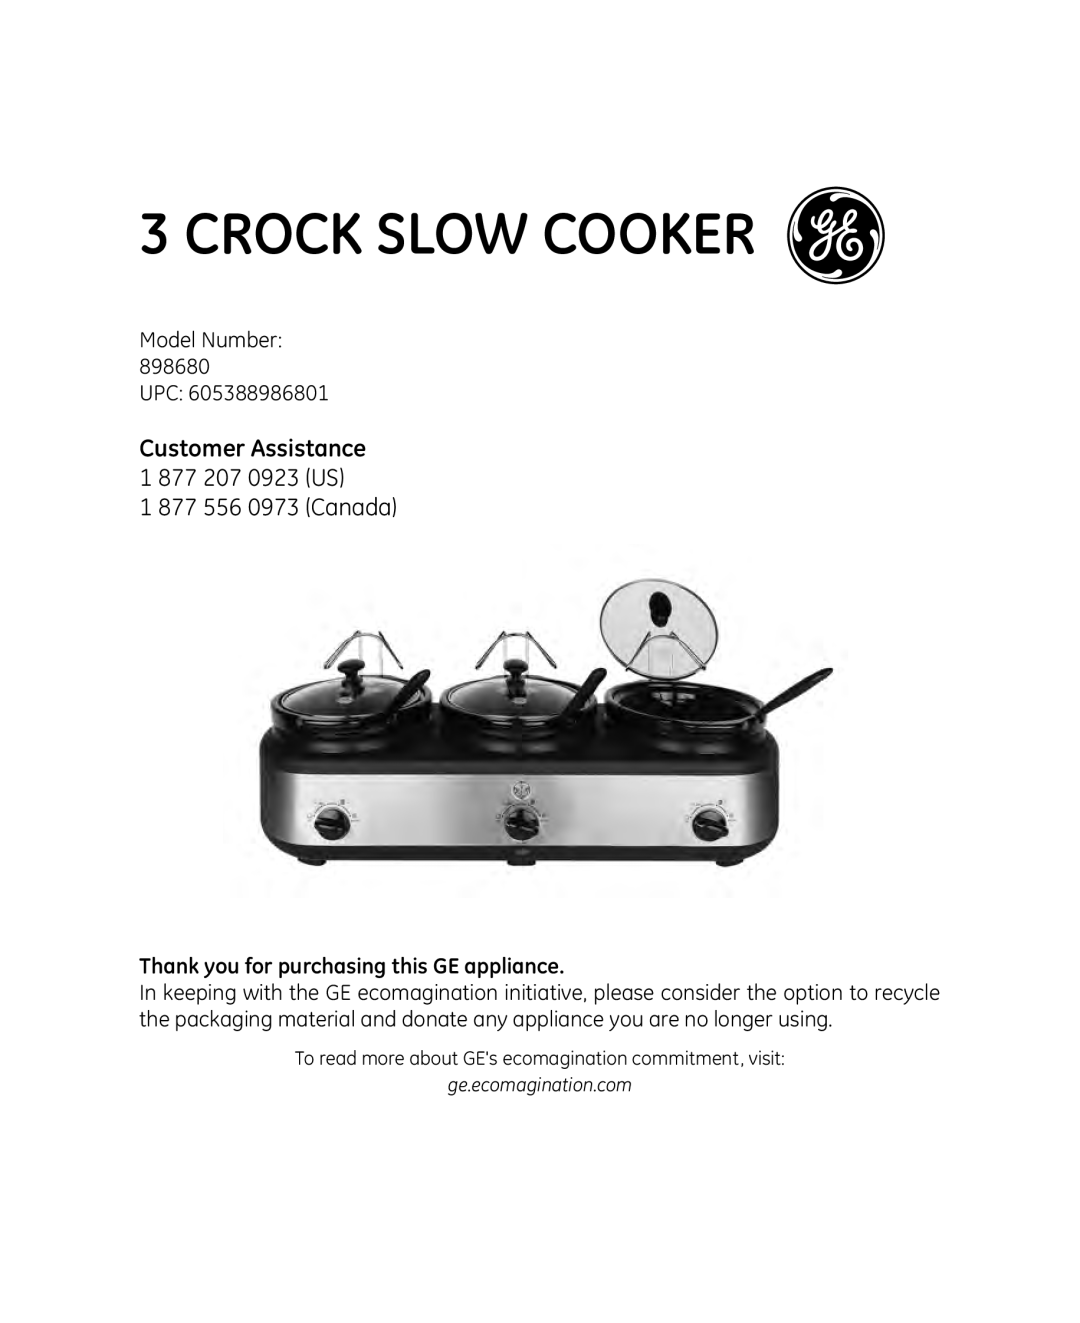 GE 898680 manual Customer Assistance 1 877 207 0923 US, Thank you for purchasing this GE appliance, Crock Slow Cooker 